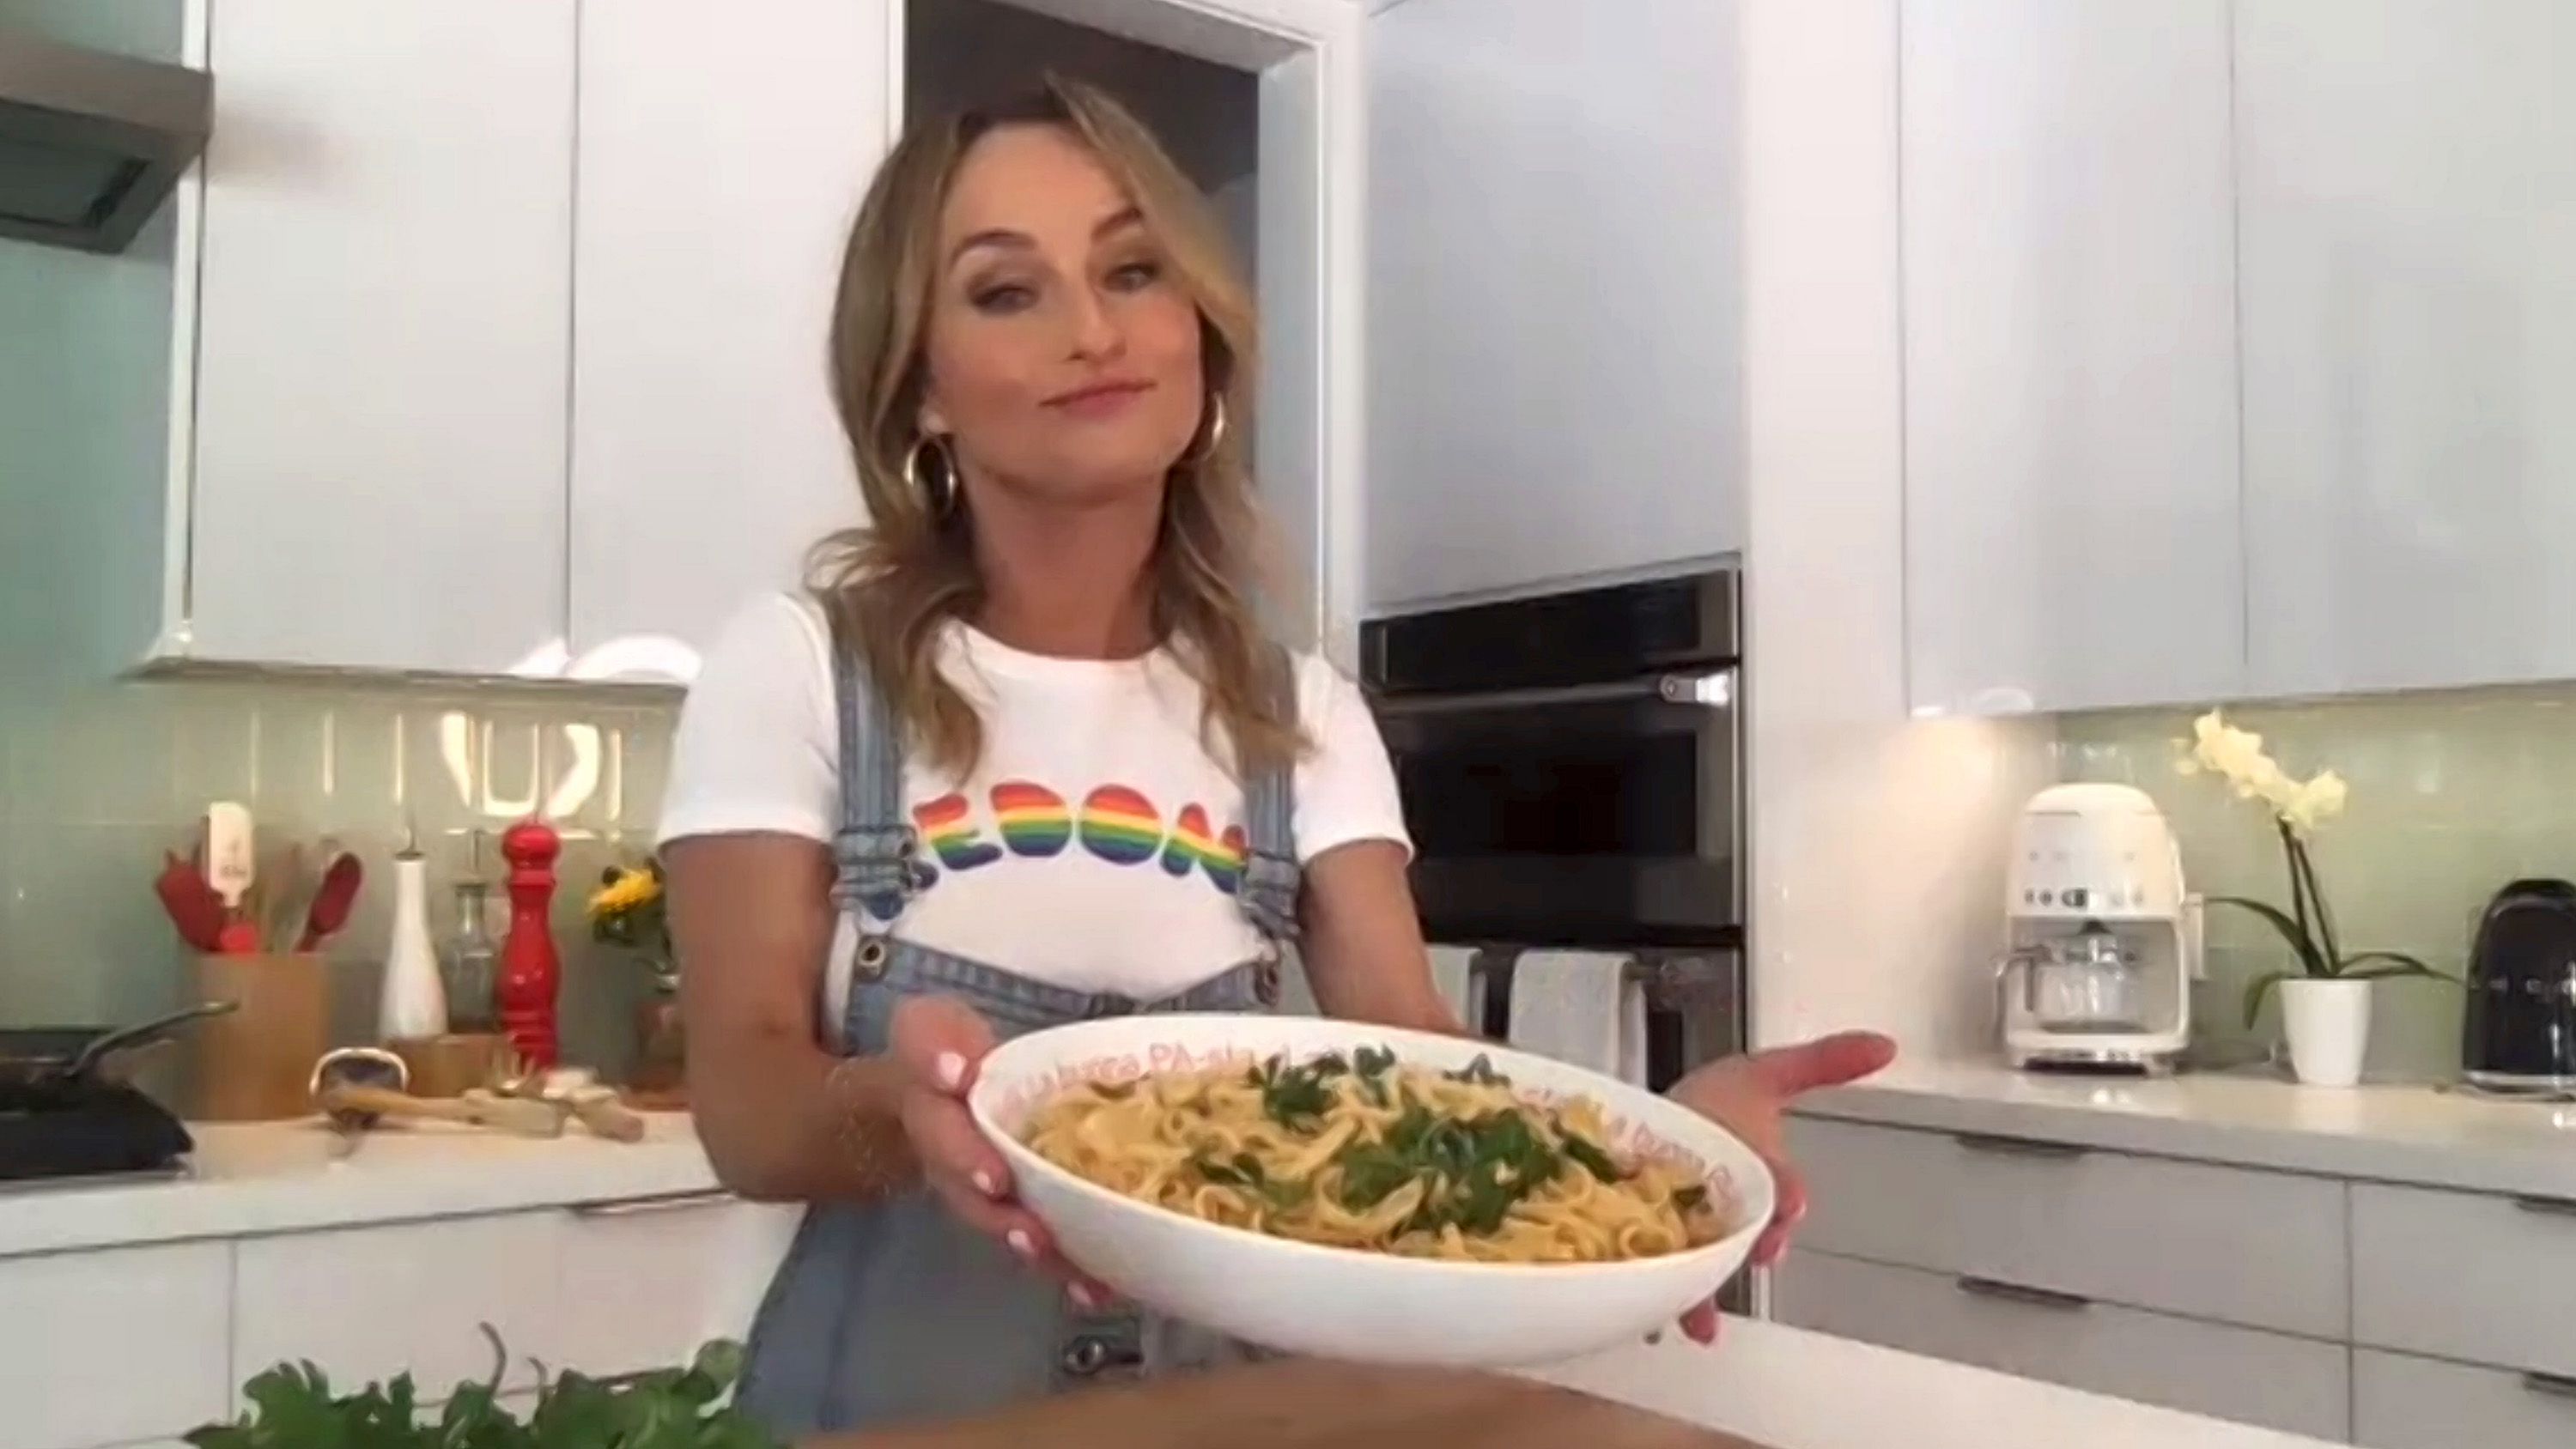 Food Network star Giada De Laurentiis holds a bowl of pasta and greens in this photograph.